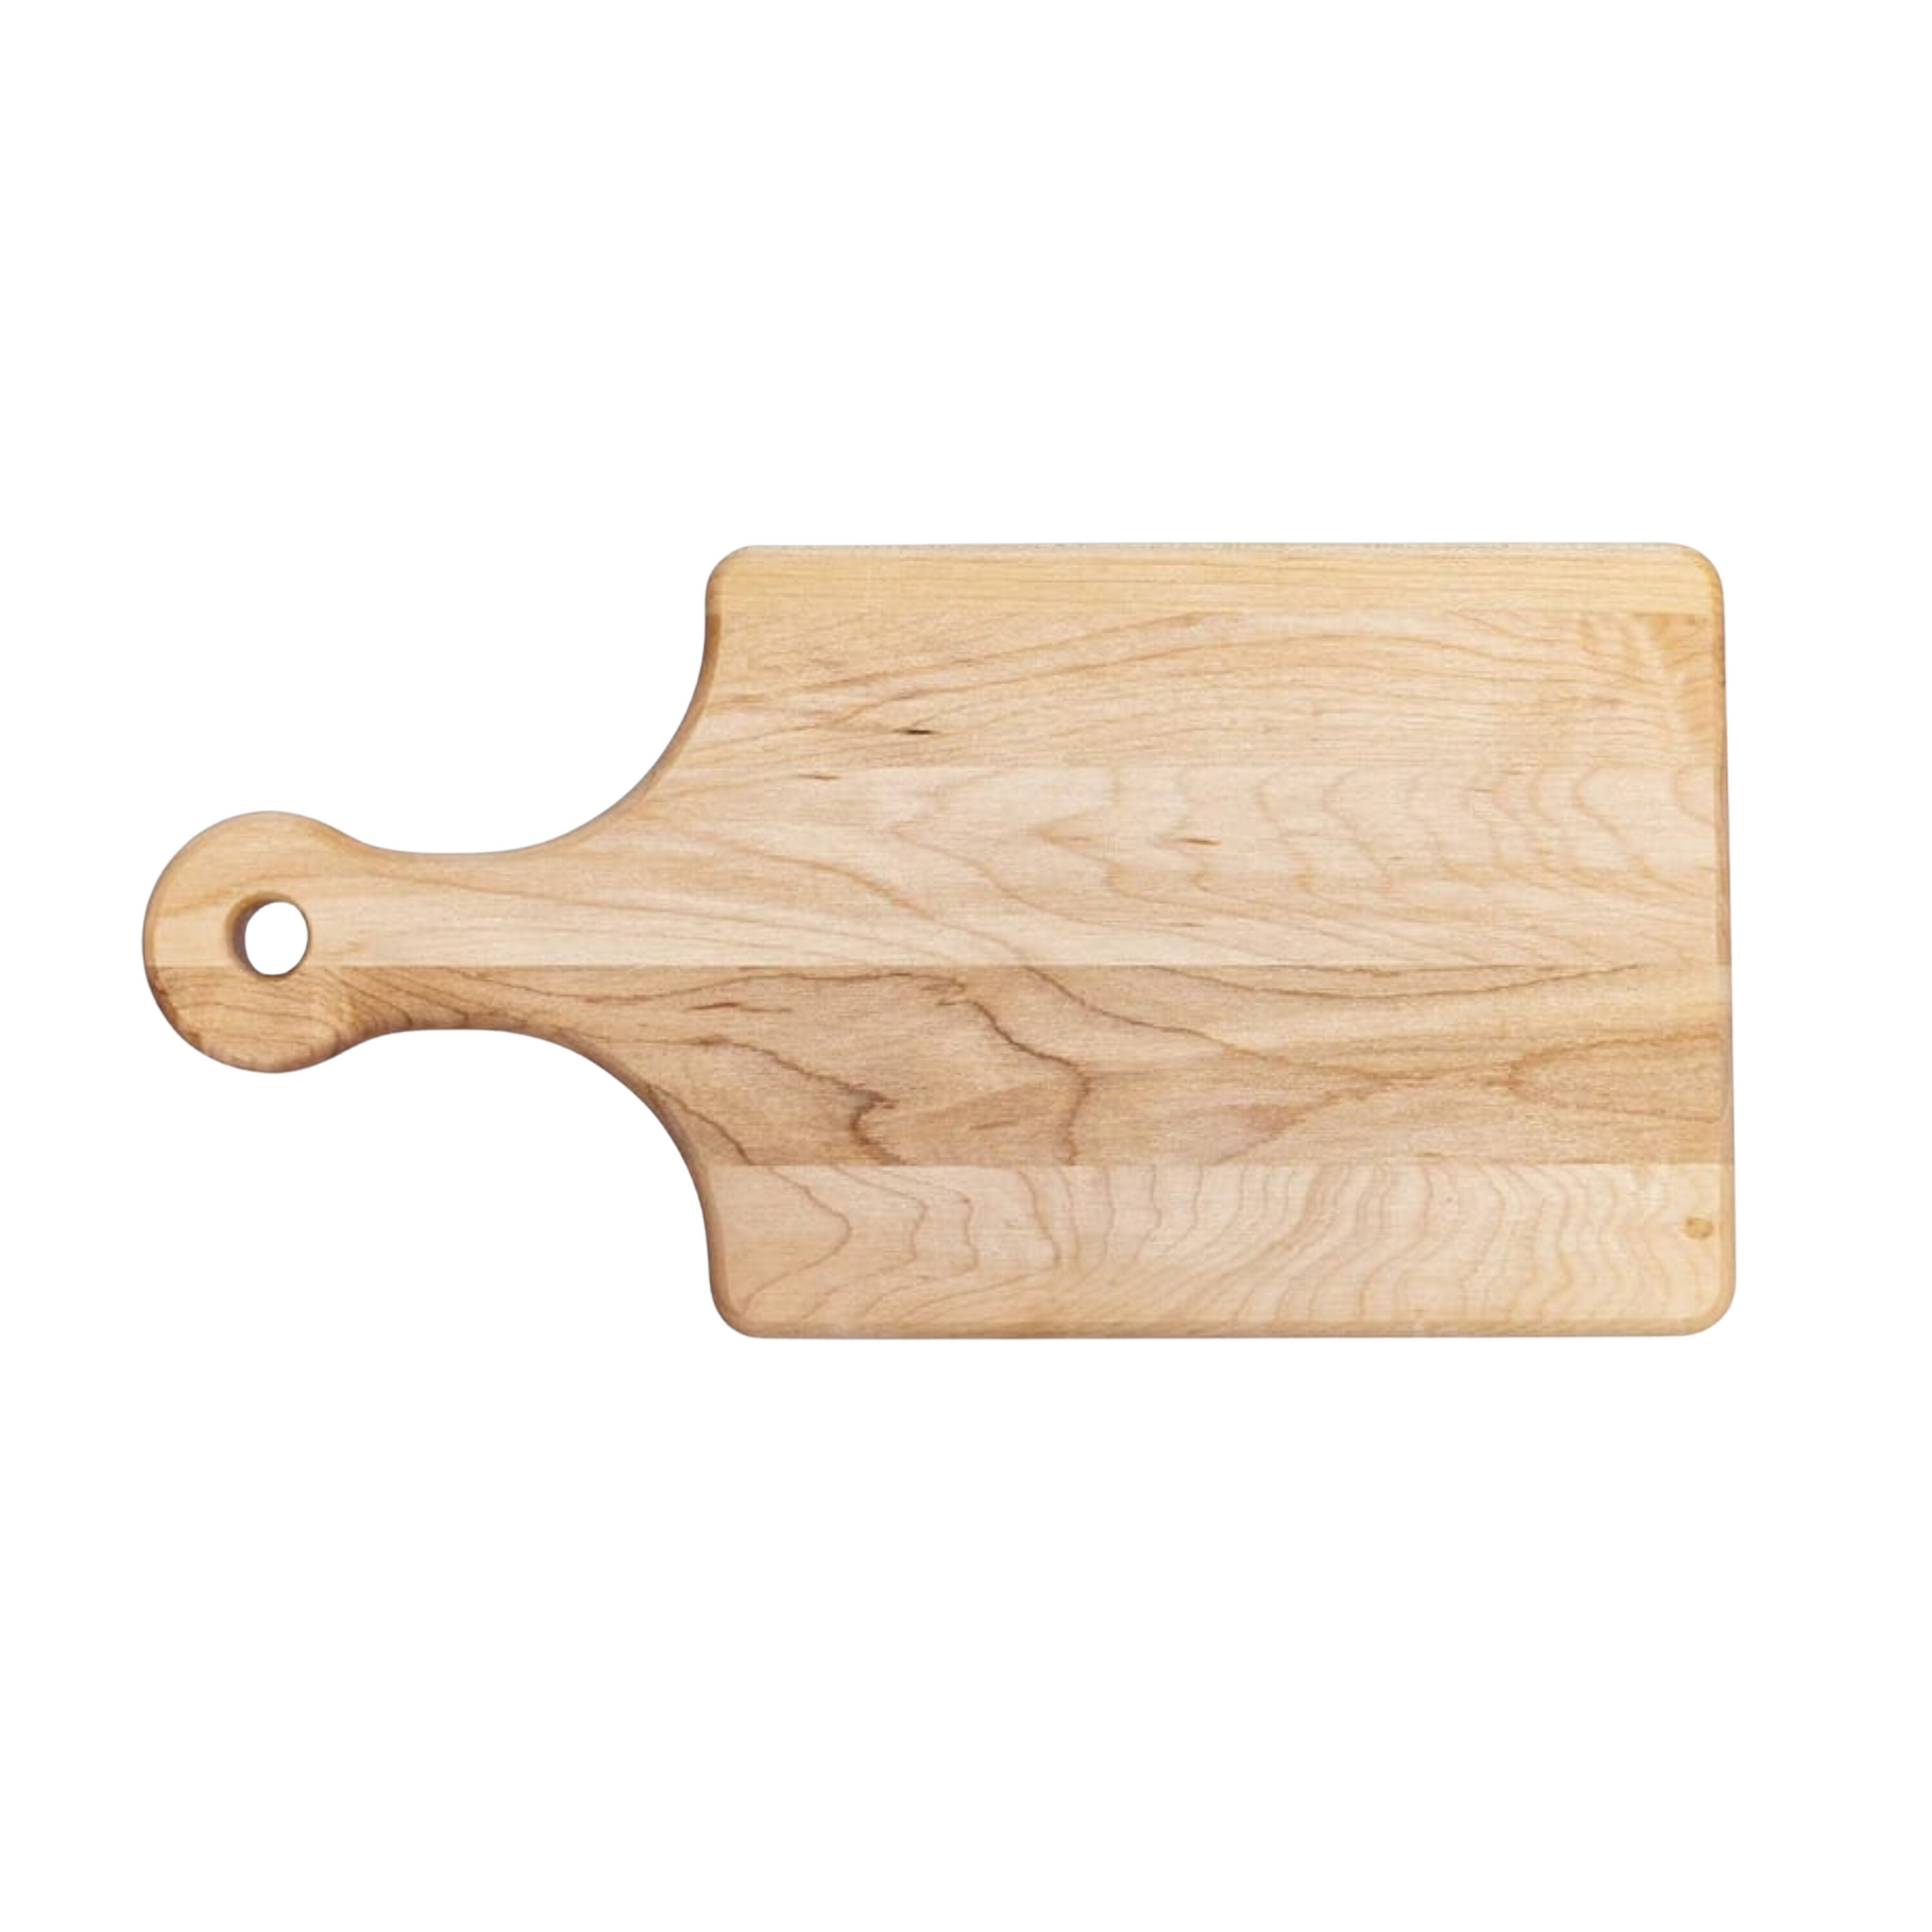 Eat Pork Cutting Board - Premium Cutting Boards from Hipster Lasers - Just $40! Shop now at Hipster Lasers